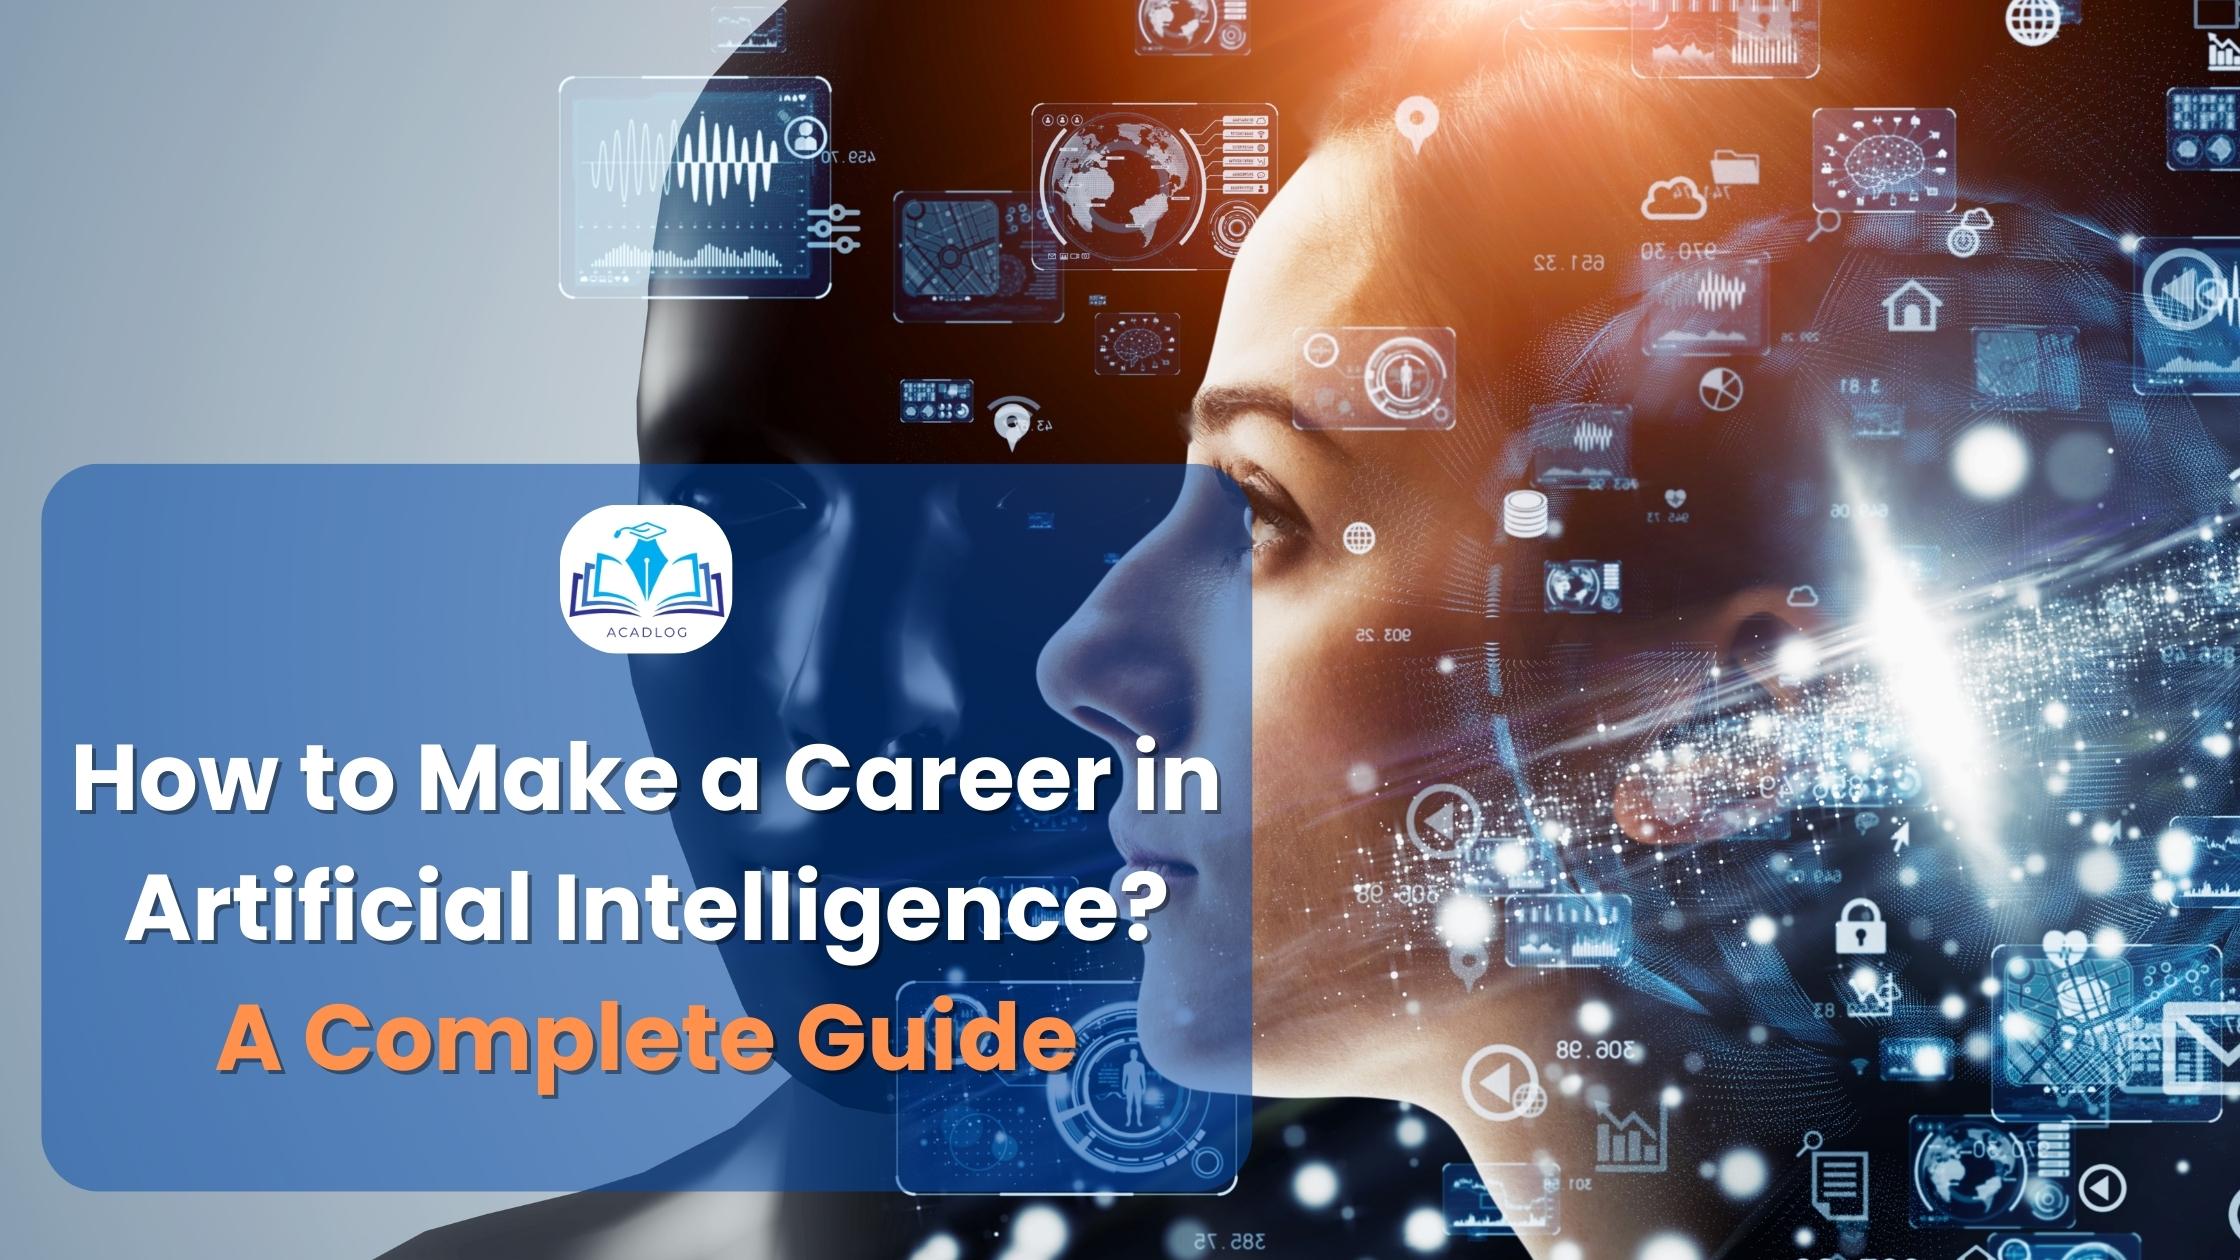 How to Make a Career in Artificial Intelligence